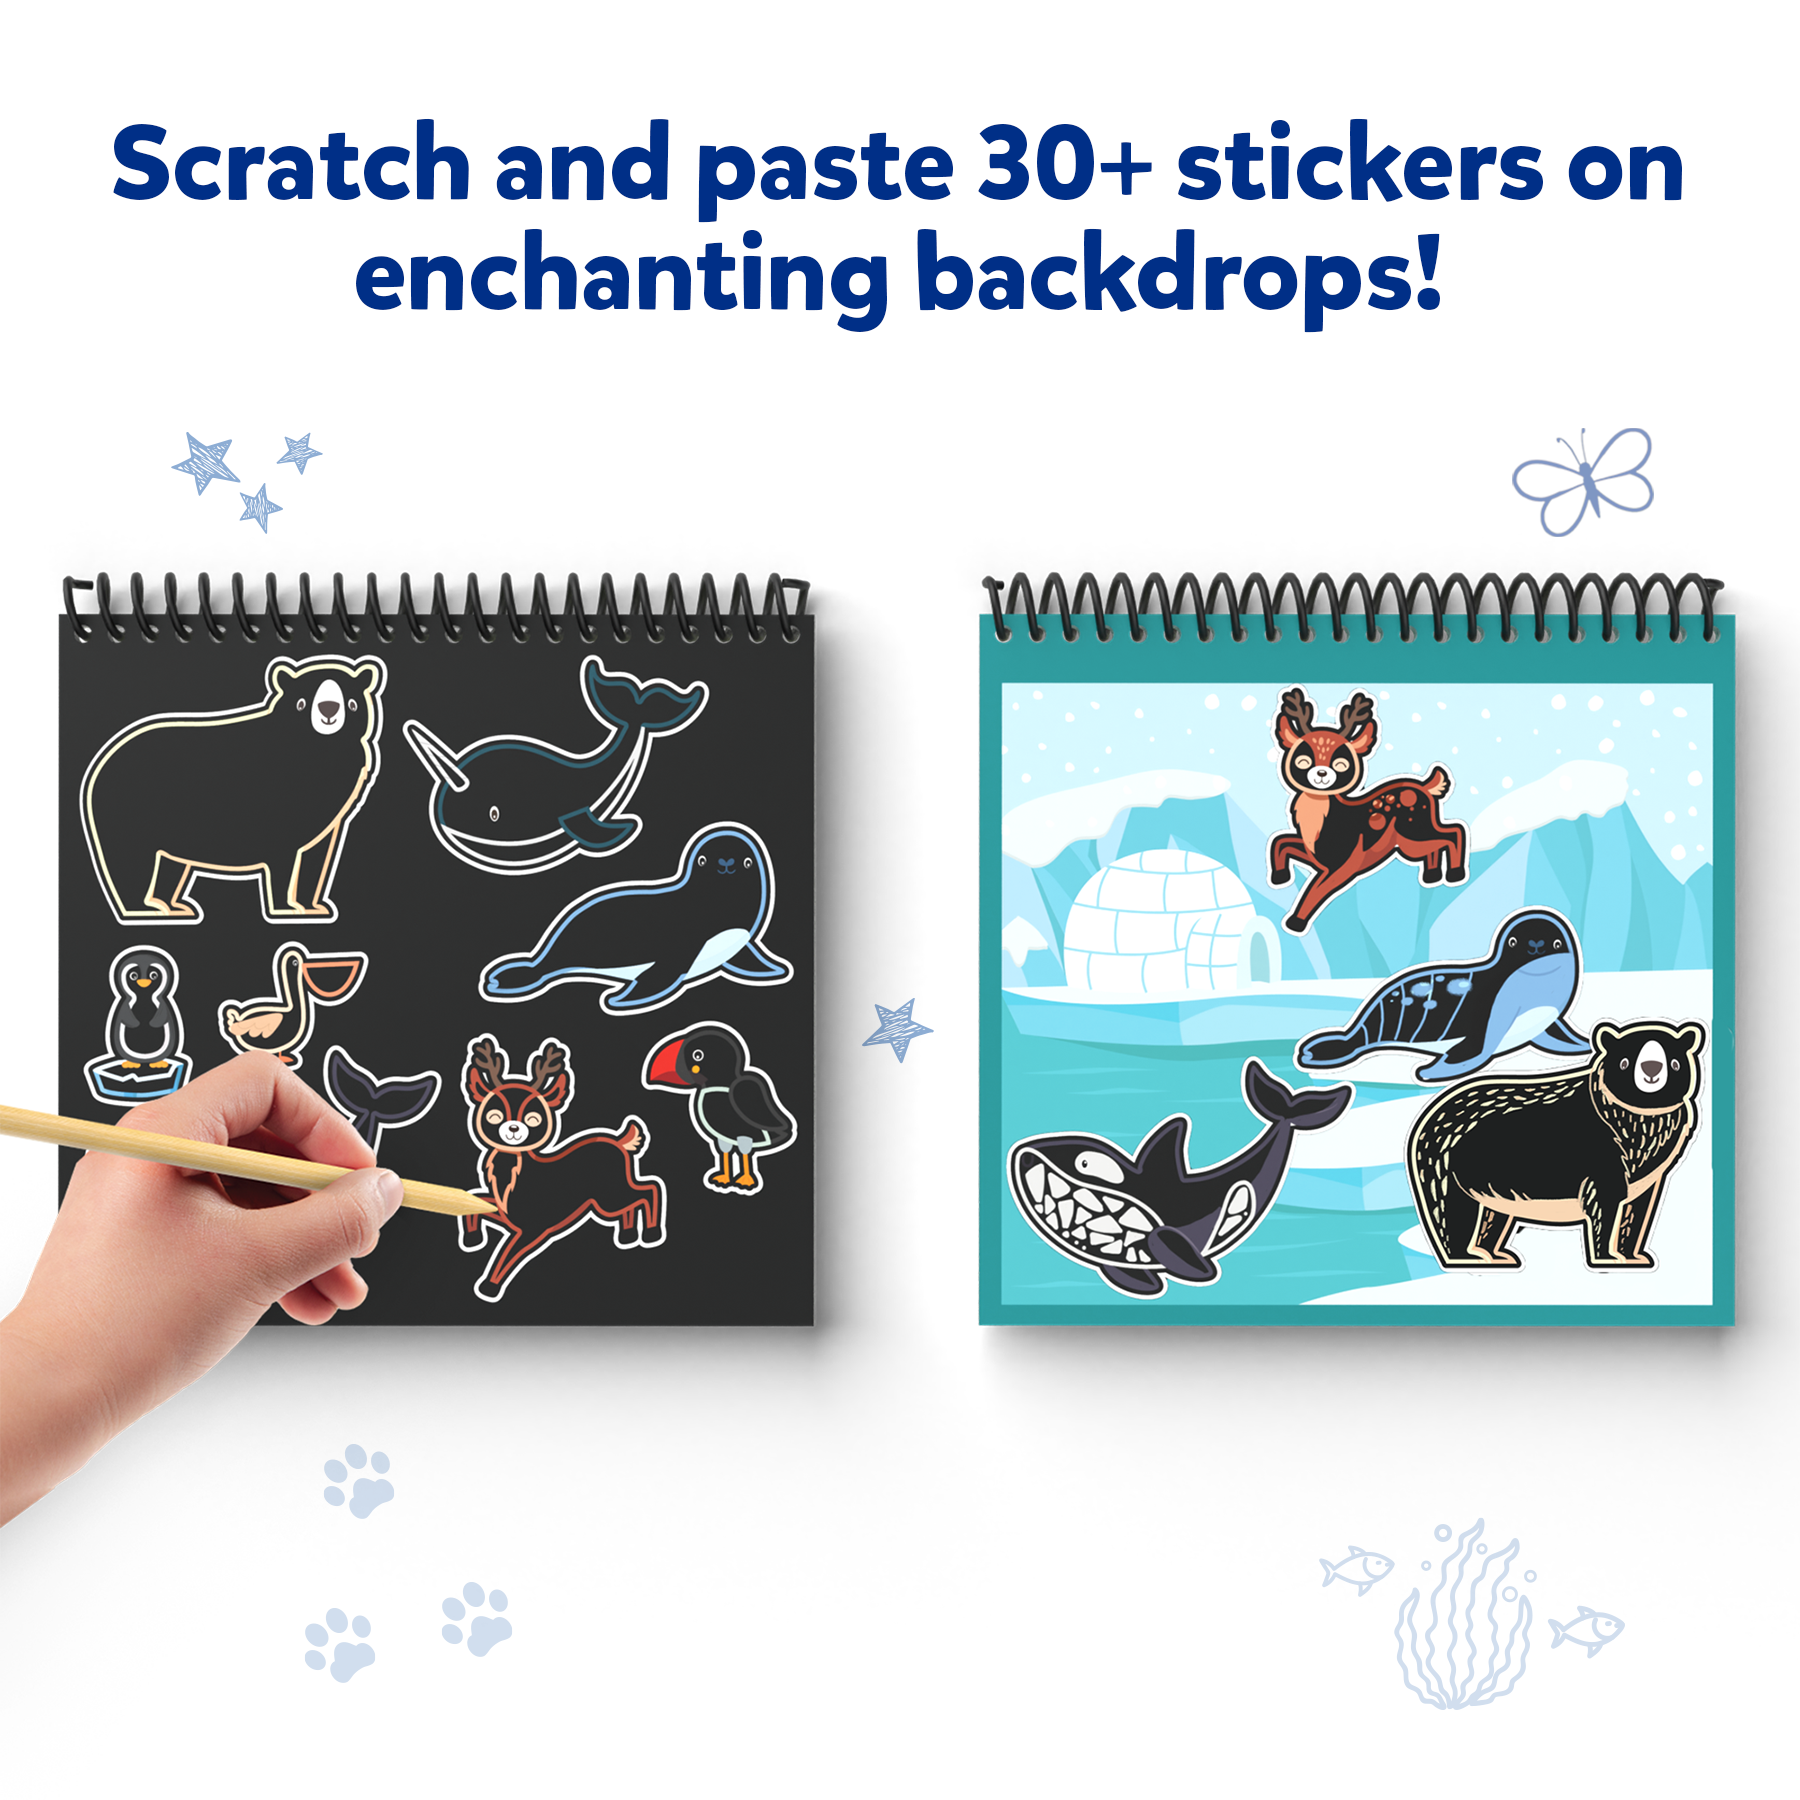 Skillmatics Magical Scratch Art Book for Kids - Animals, Craft Kits, DIY Activity & Stickers, Gifts for Ages 3 to 8